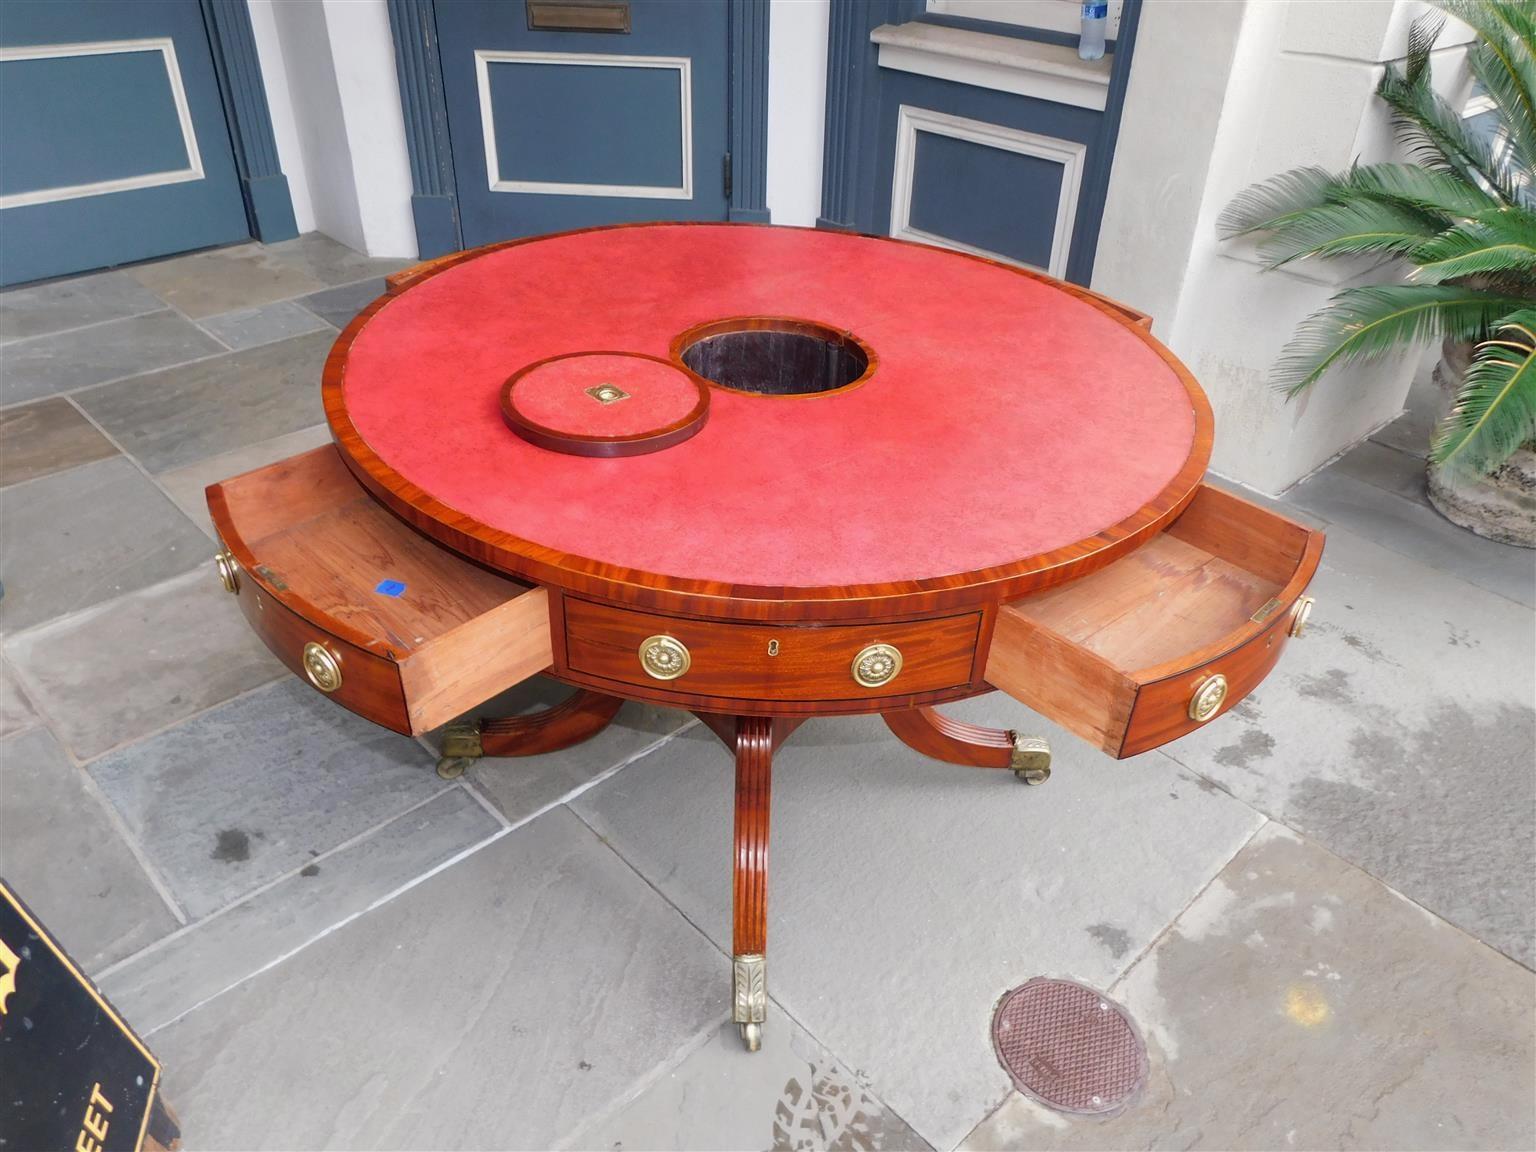 English Regency Mahogany Leather Top Ebony Inlaid Rent Table, Circa 1790 For Sale 1